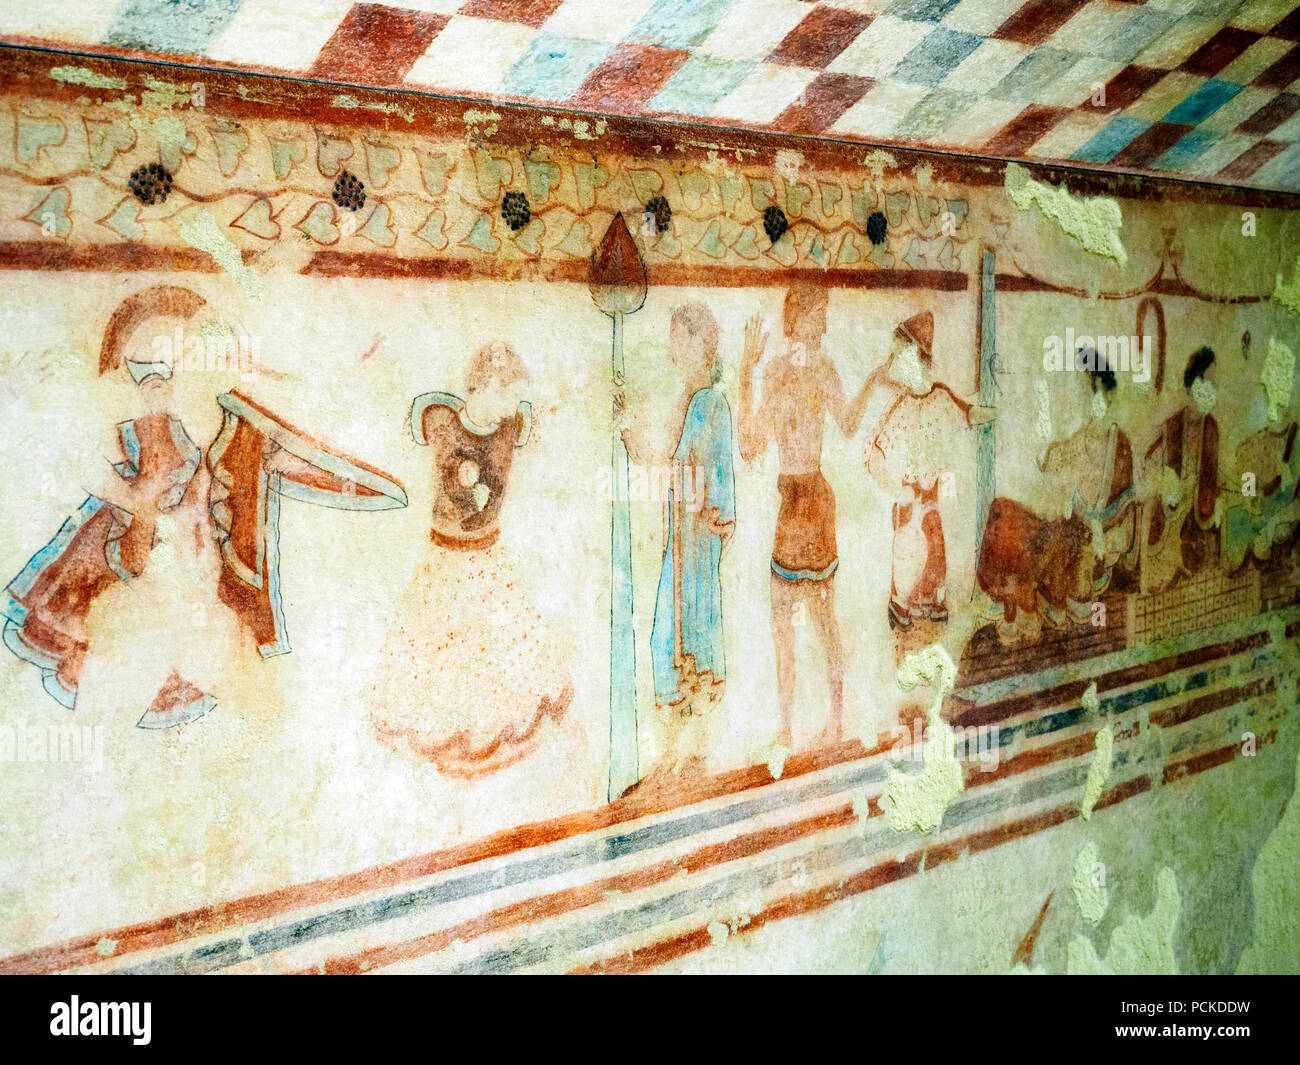 Tomb of the funeral bed decorated walls 470-460 BC - National Etruscan Museum of Villa Giulia - Rome, Italy Stock Photo